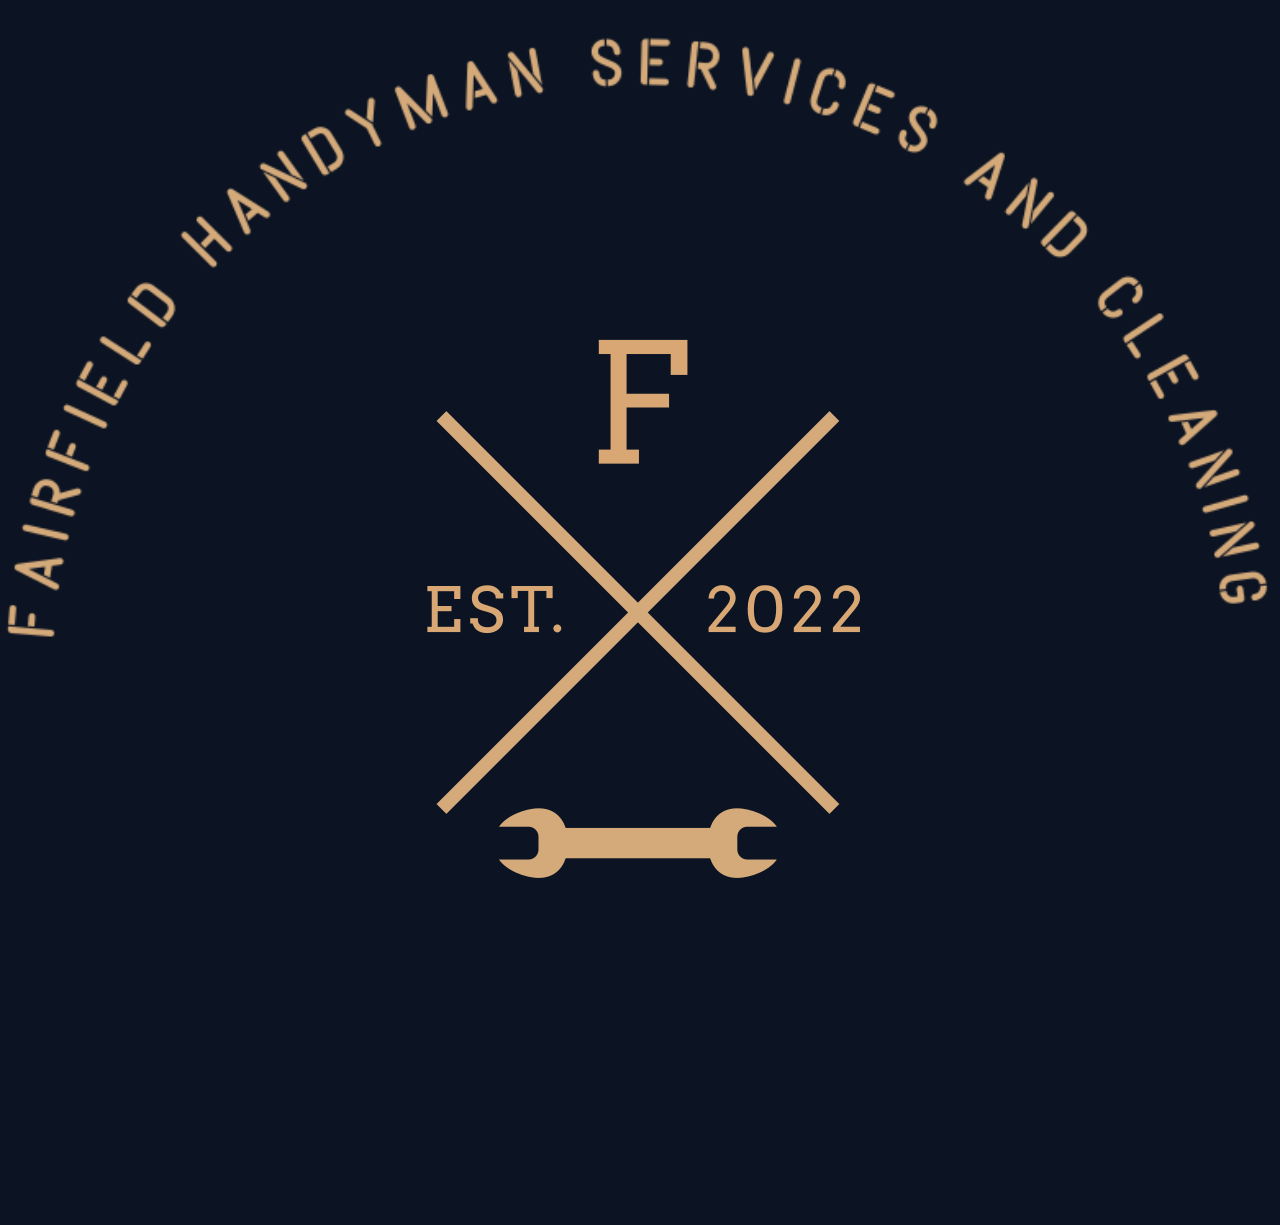 FAIRFIELD HANDYMAN SERVICES AND CLEANING 's logo